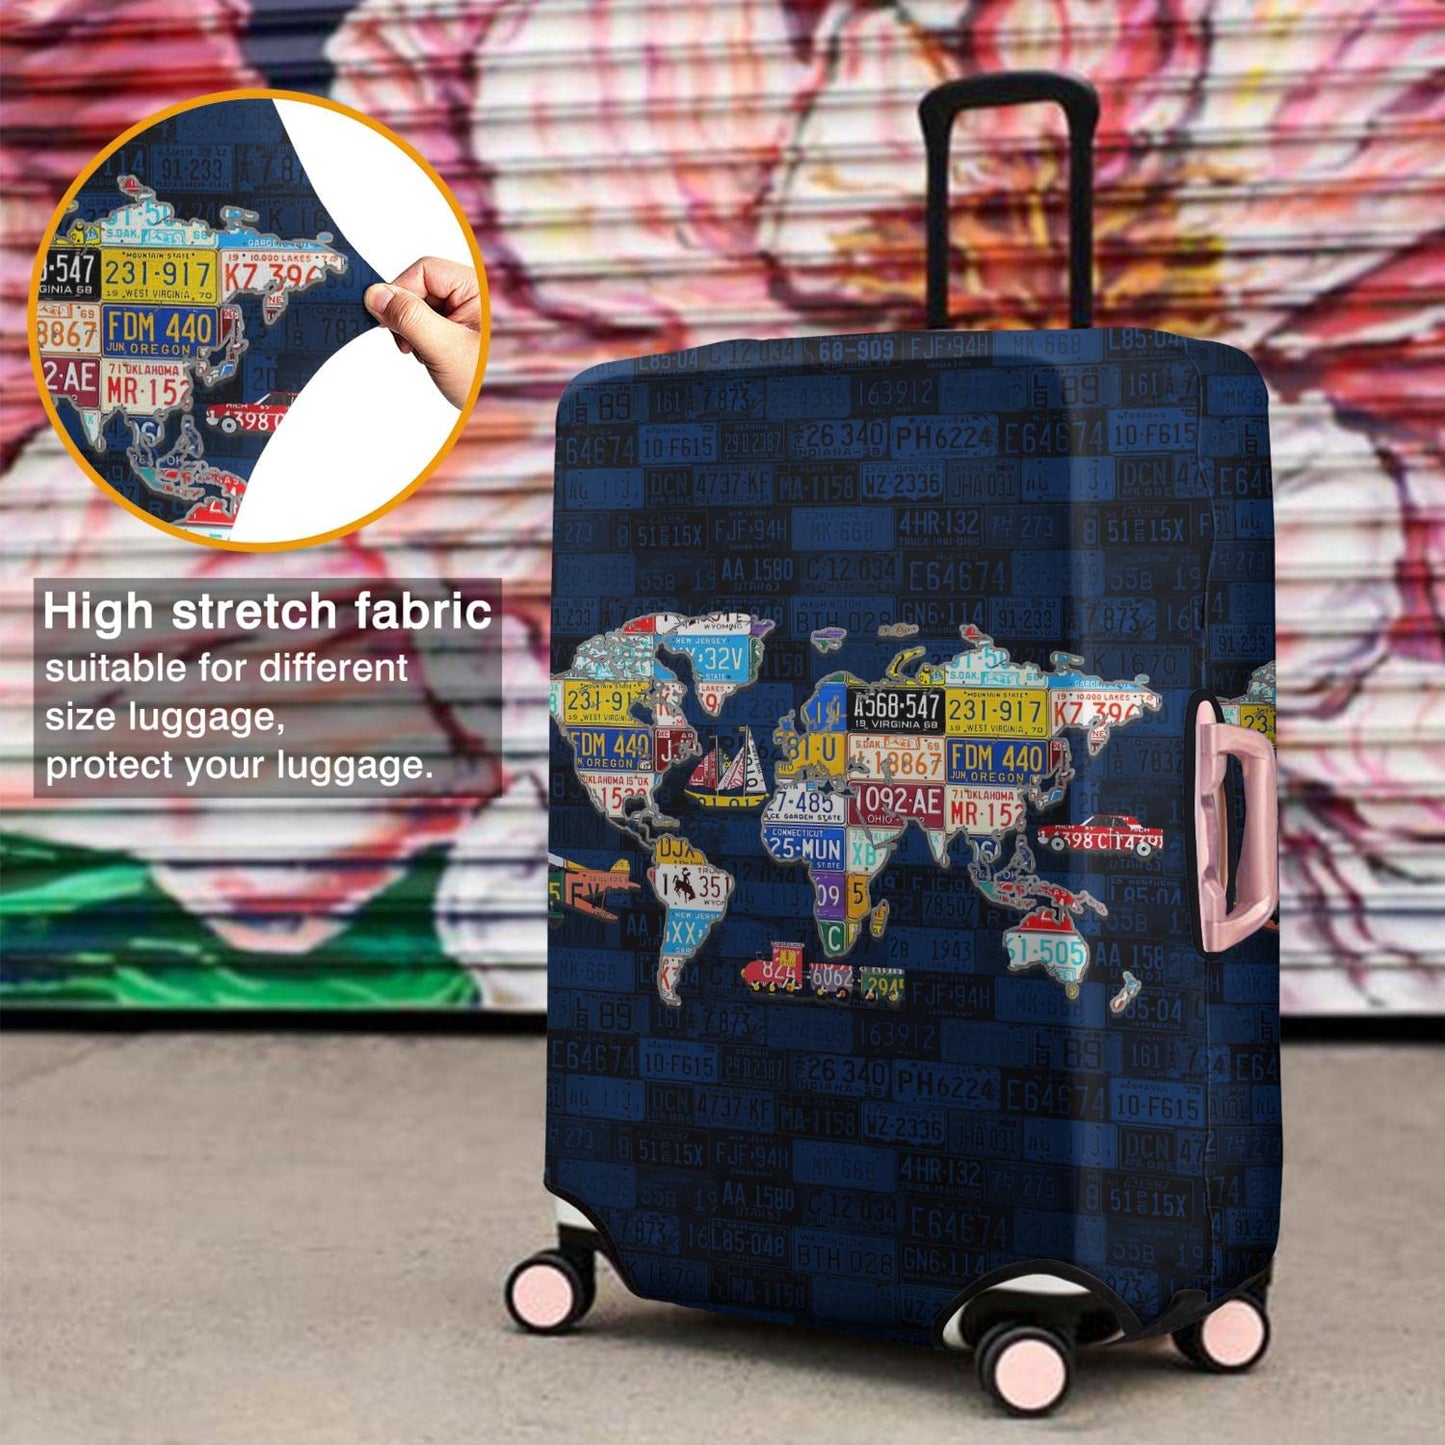 World Travel License Plate Map Suitcase Cover Fit 22-24 Inch Luggage